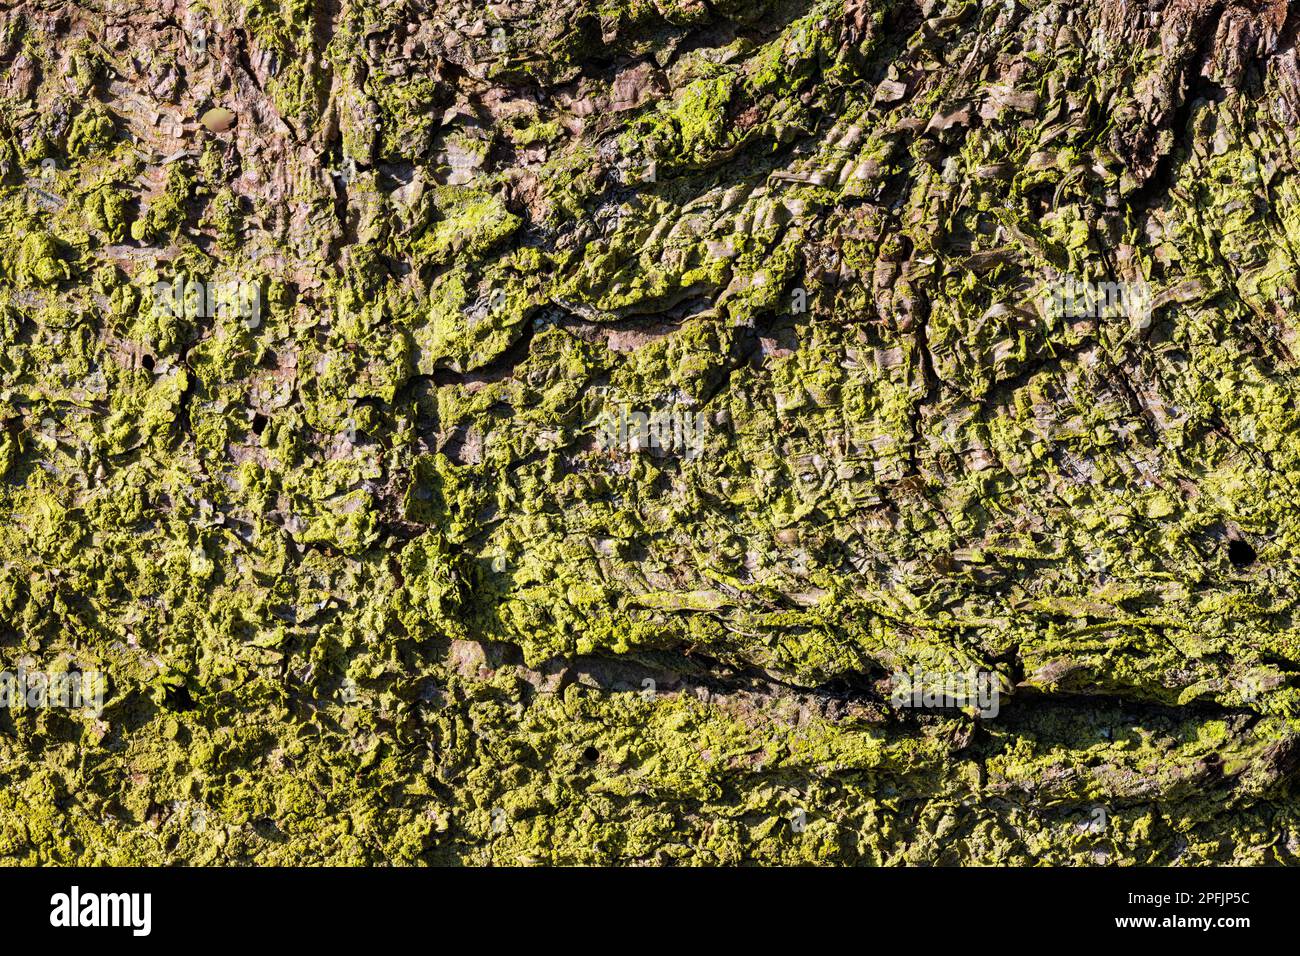 Closeup of rough mossy bark of dry spruce tree trunk as natural background. Picea. Cracked surface of old conifer with beautiful green moss and lichen. Stock Photo